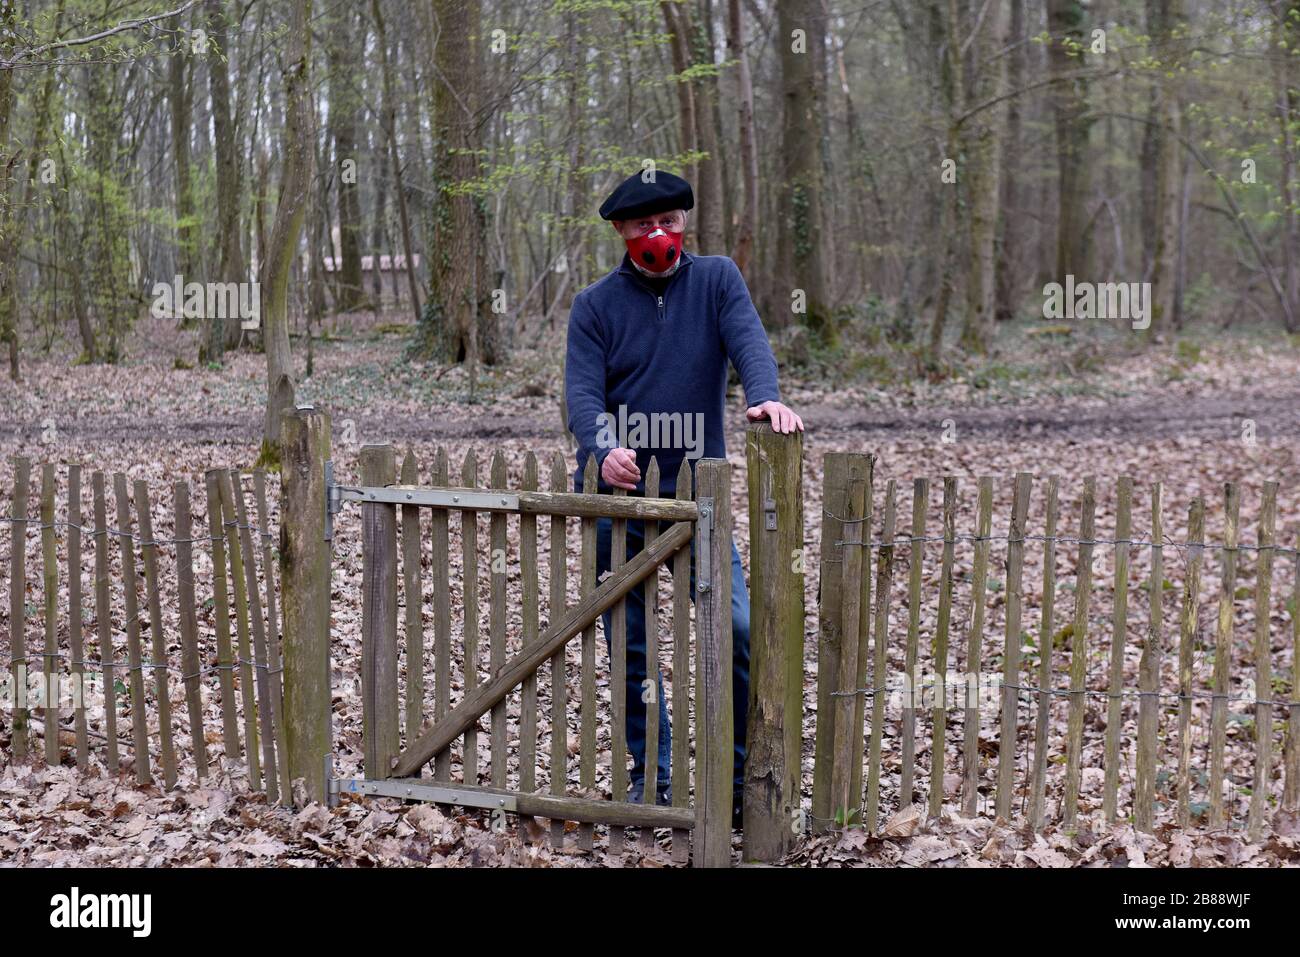 Man wearing face mask during Coronavirus  Covid 19 virus pandemic outbreak rural France secluded seclusion isolation hideaway rural retreat facemask Stock Photo